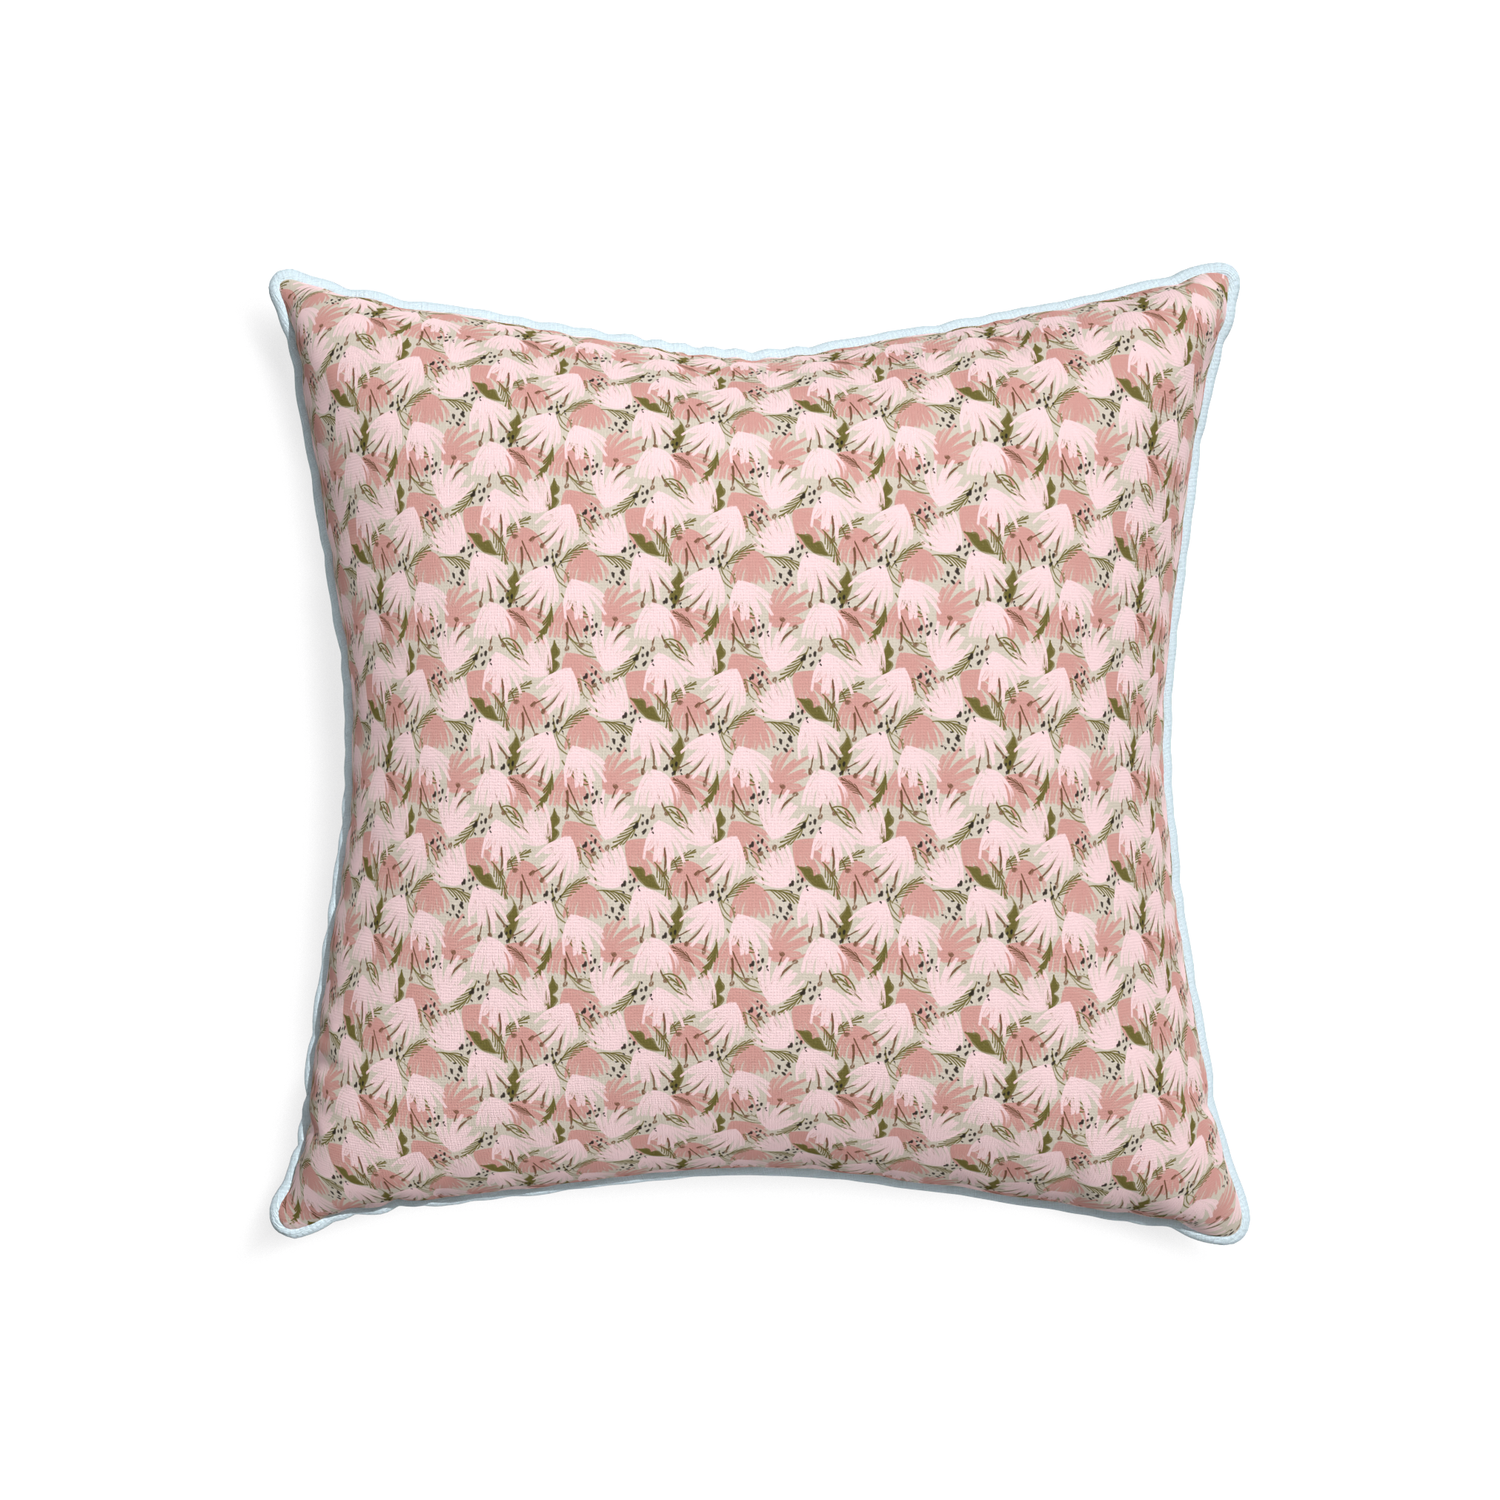 22-square eden pink custom pink floralpillow with powder piping on white background